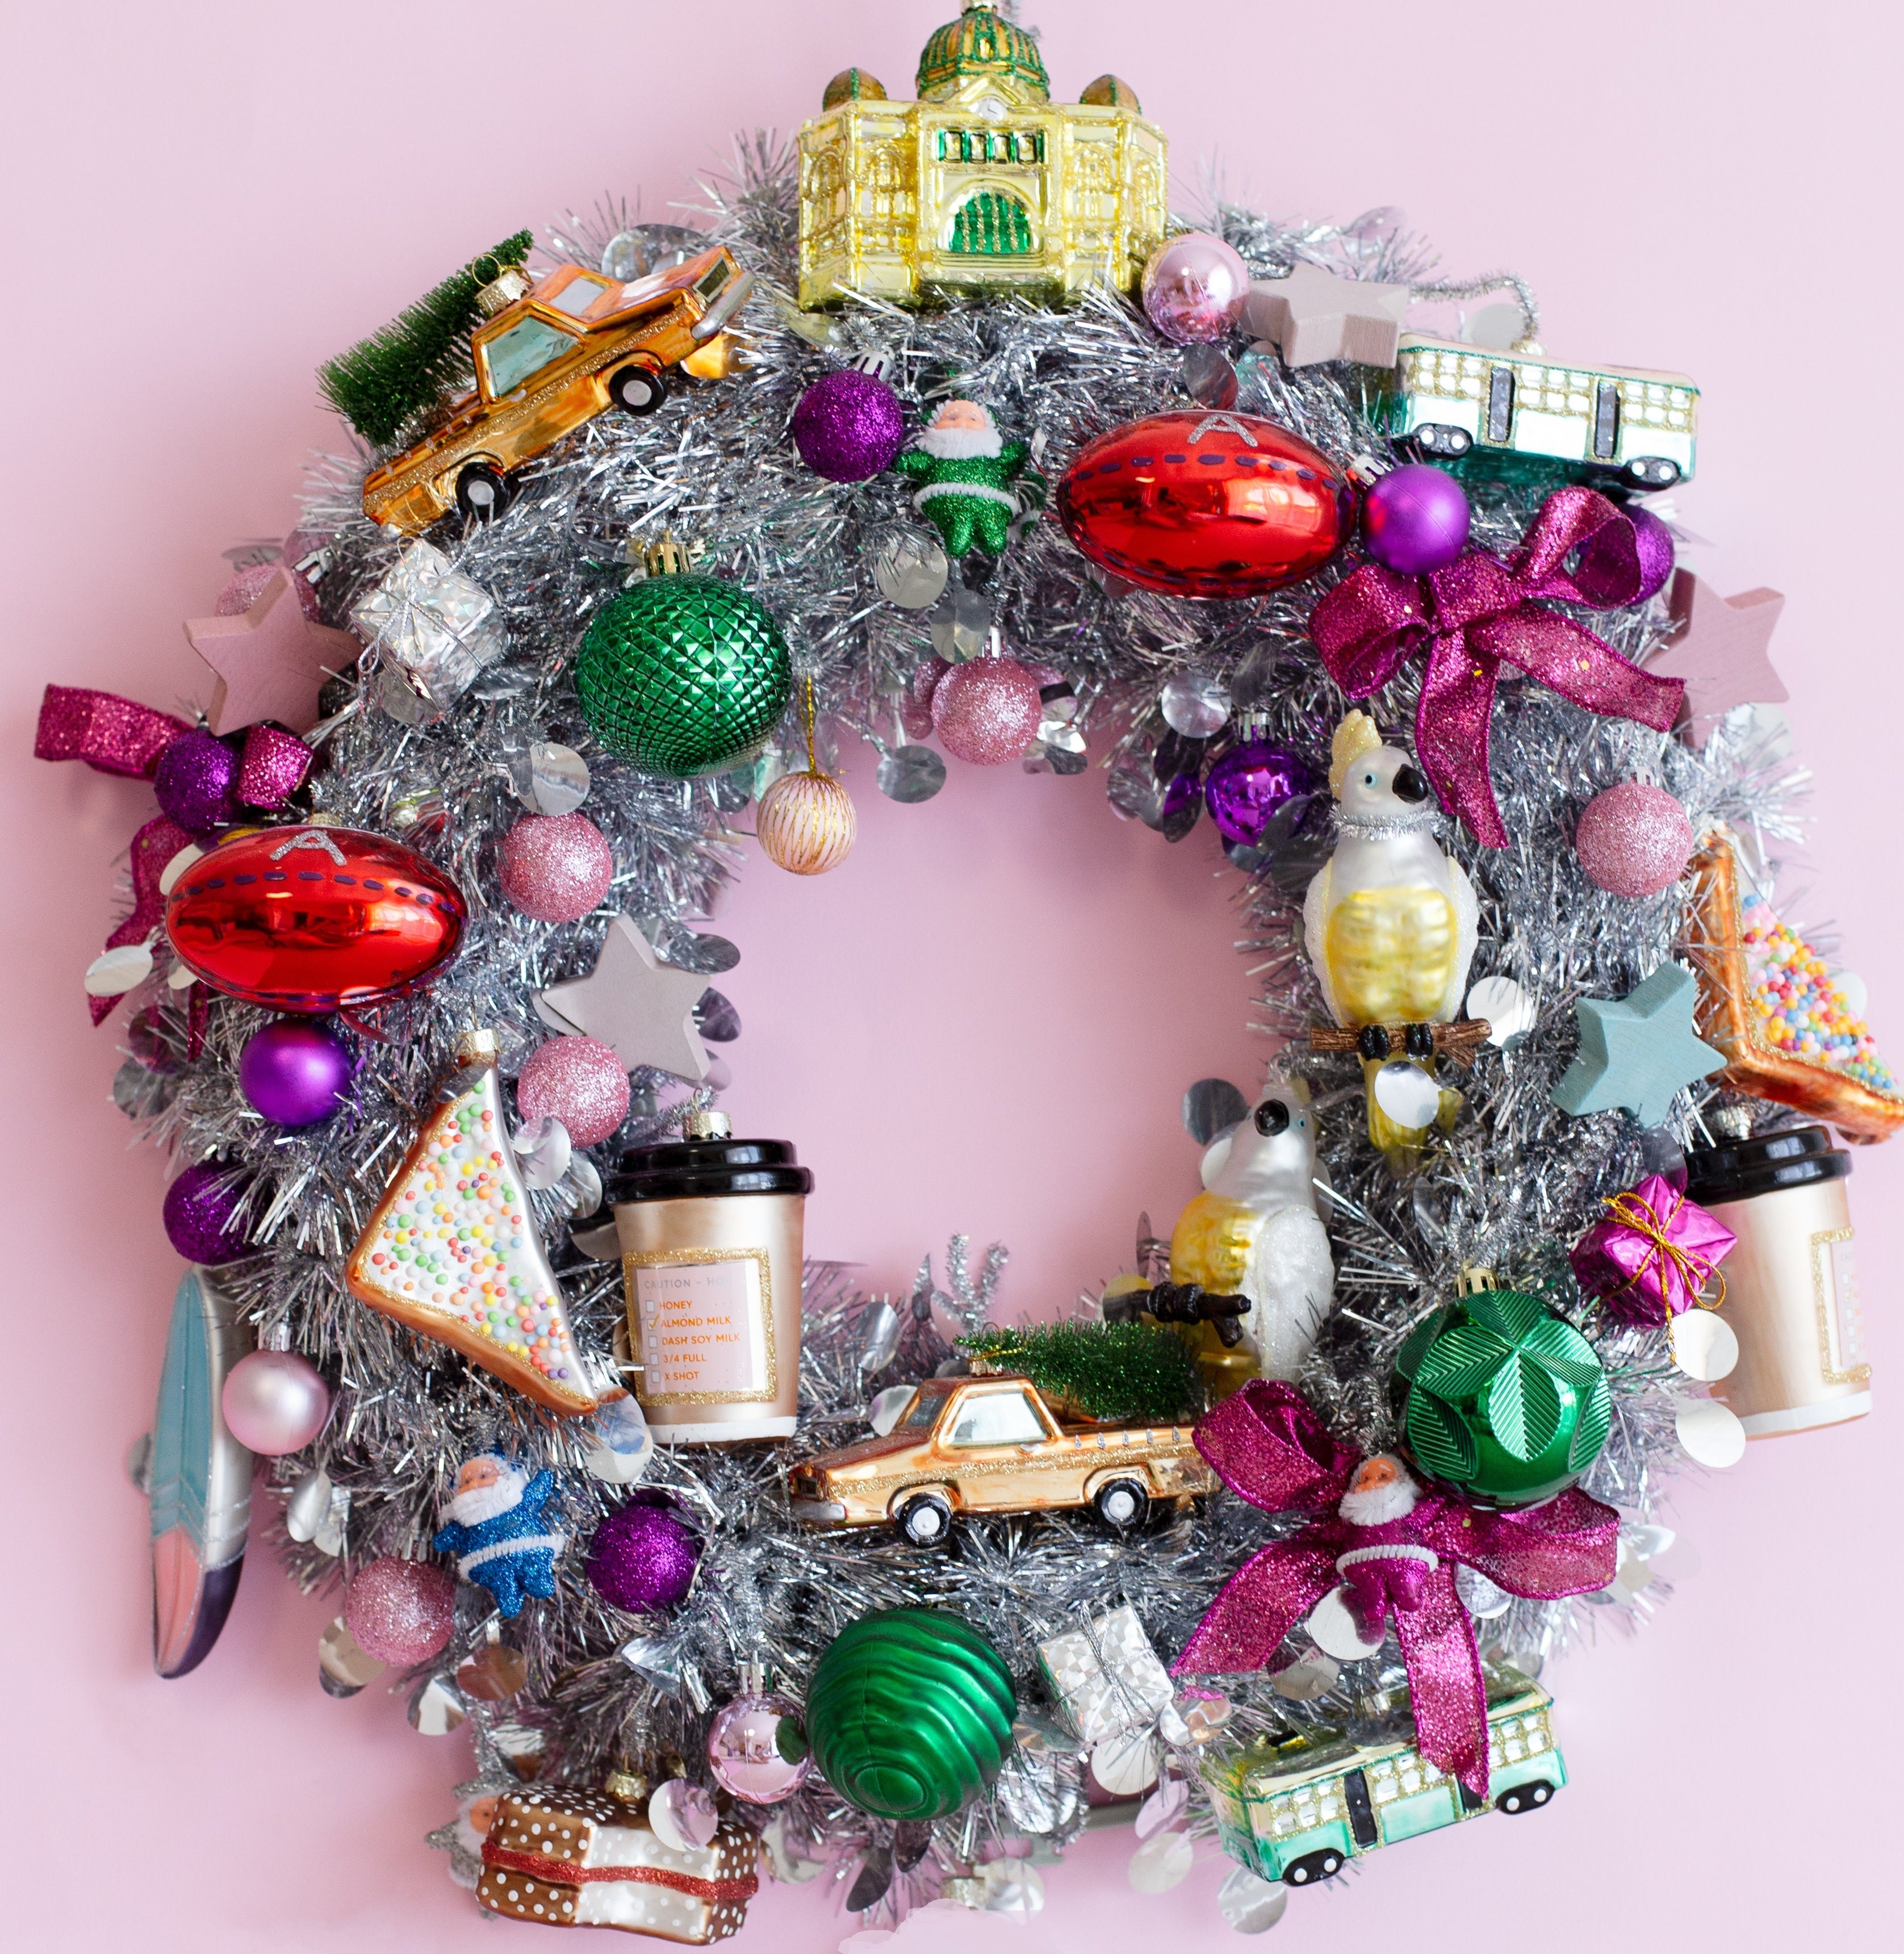 Christmas crafting fun with our iconic wreath